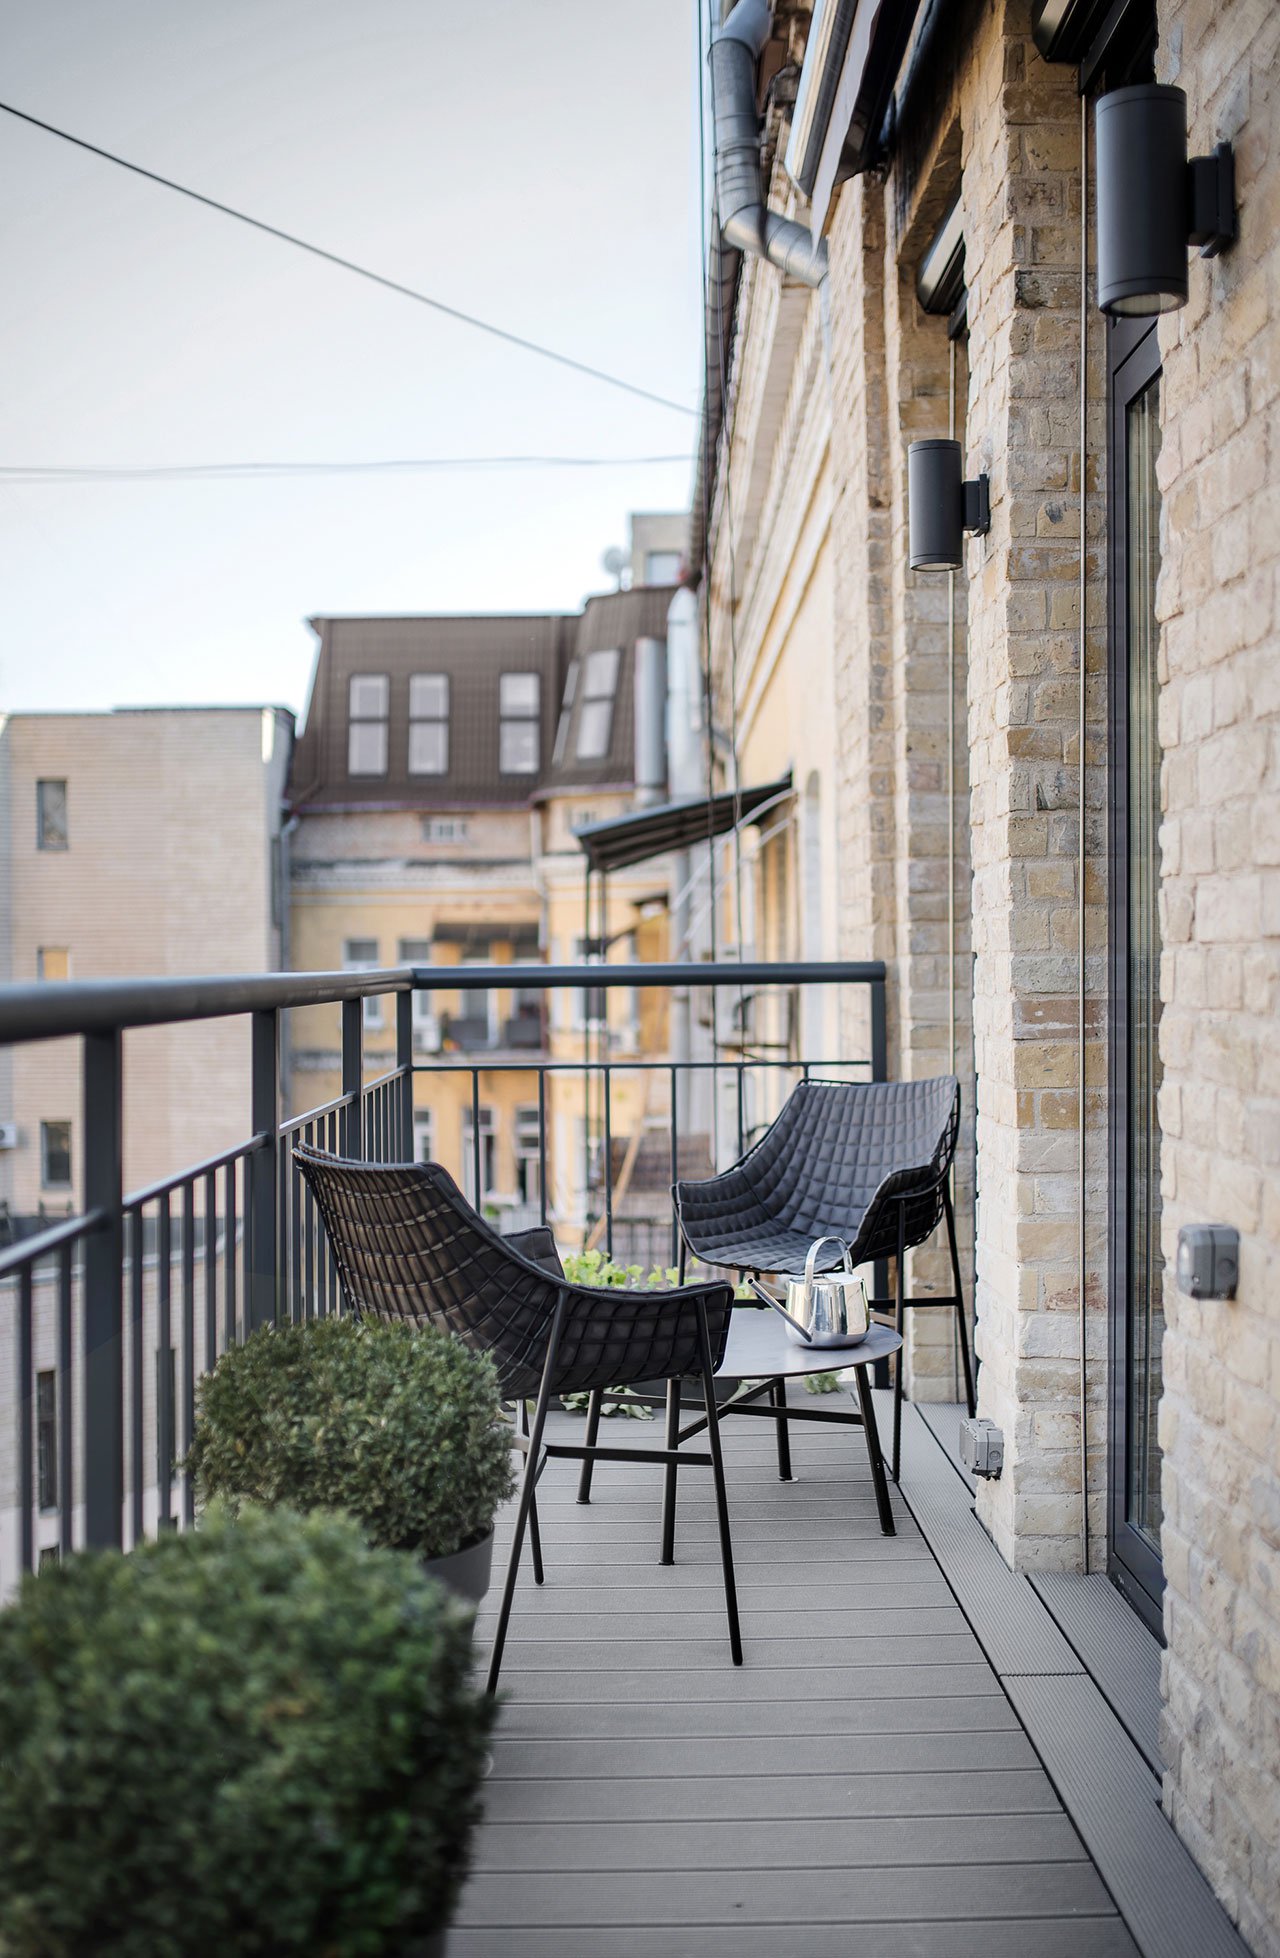 The small balcony features a little sitting space with a coffee table